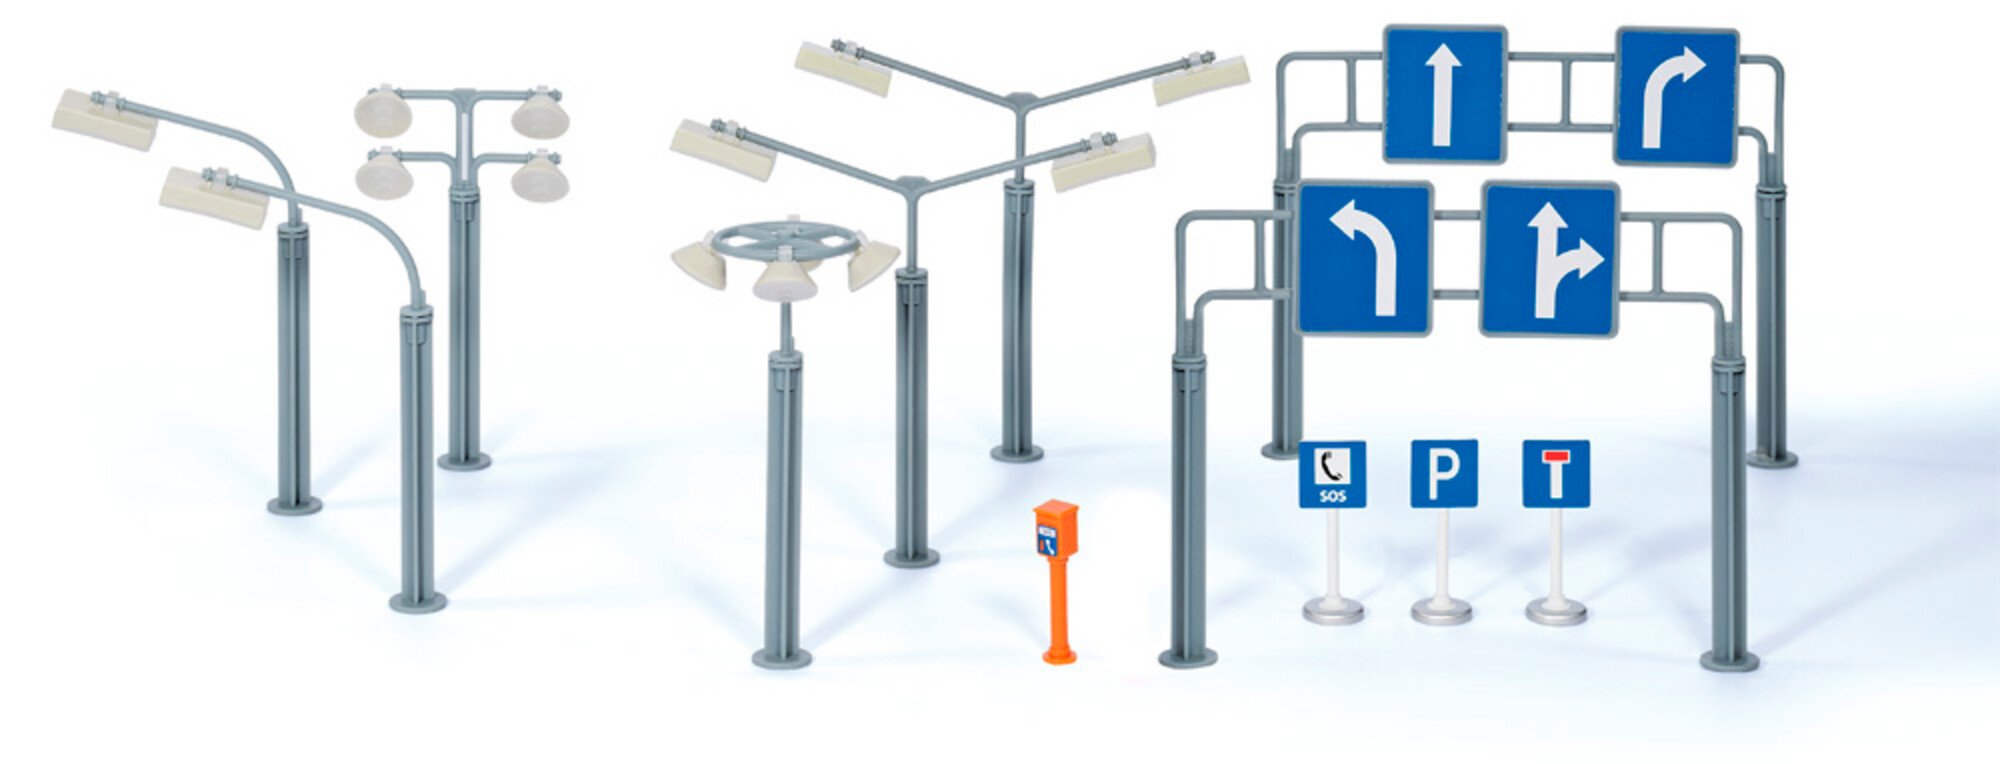 Road signs and street lamps